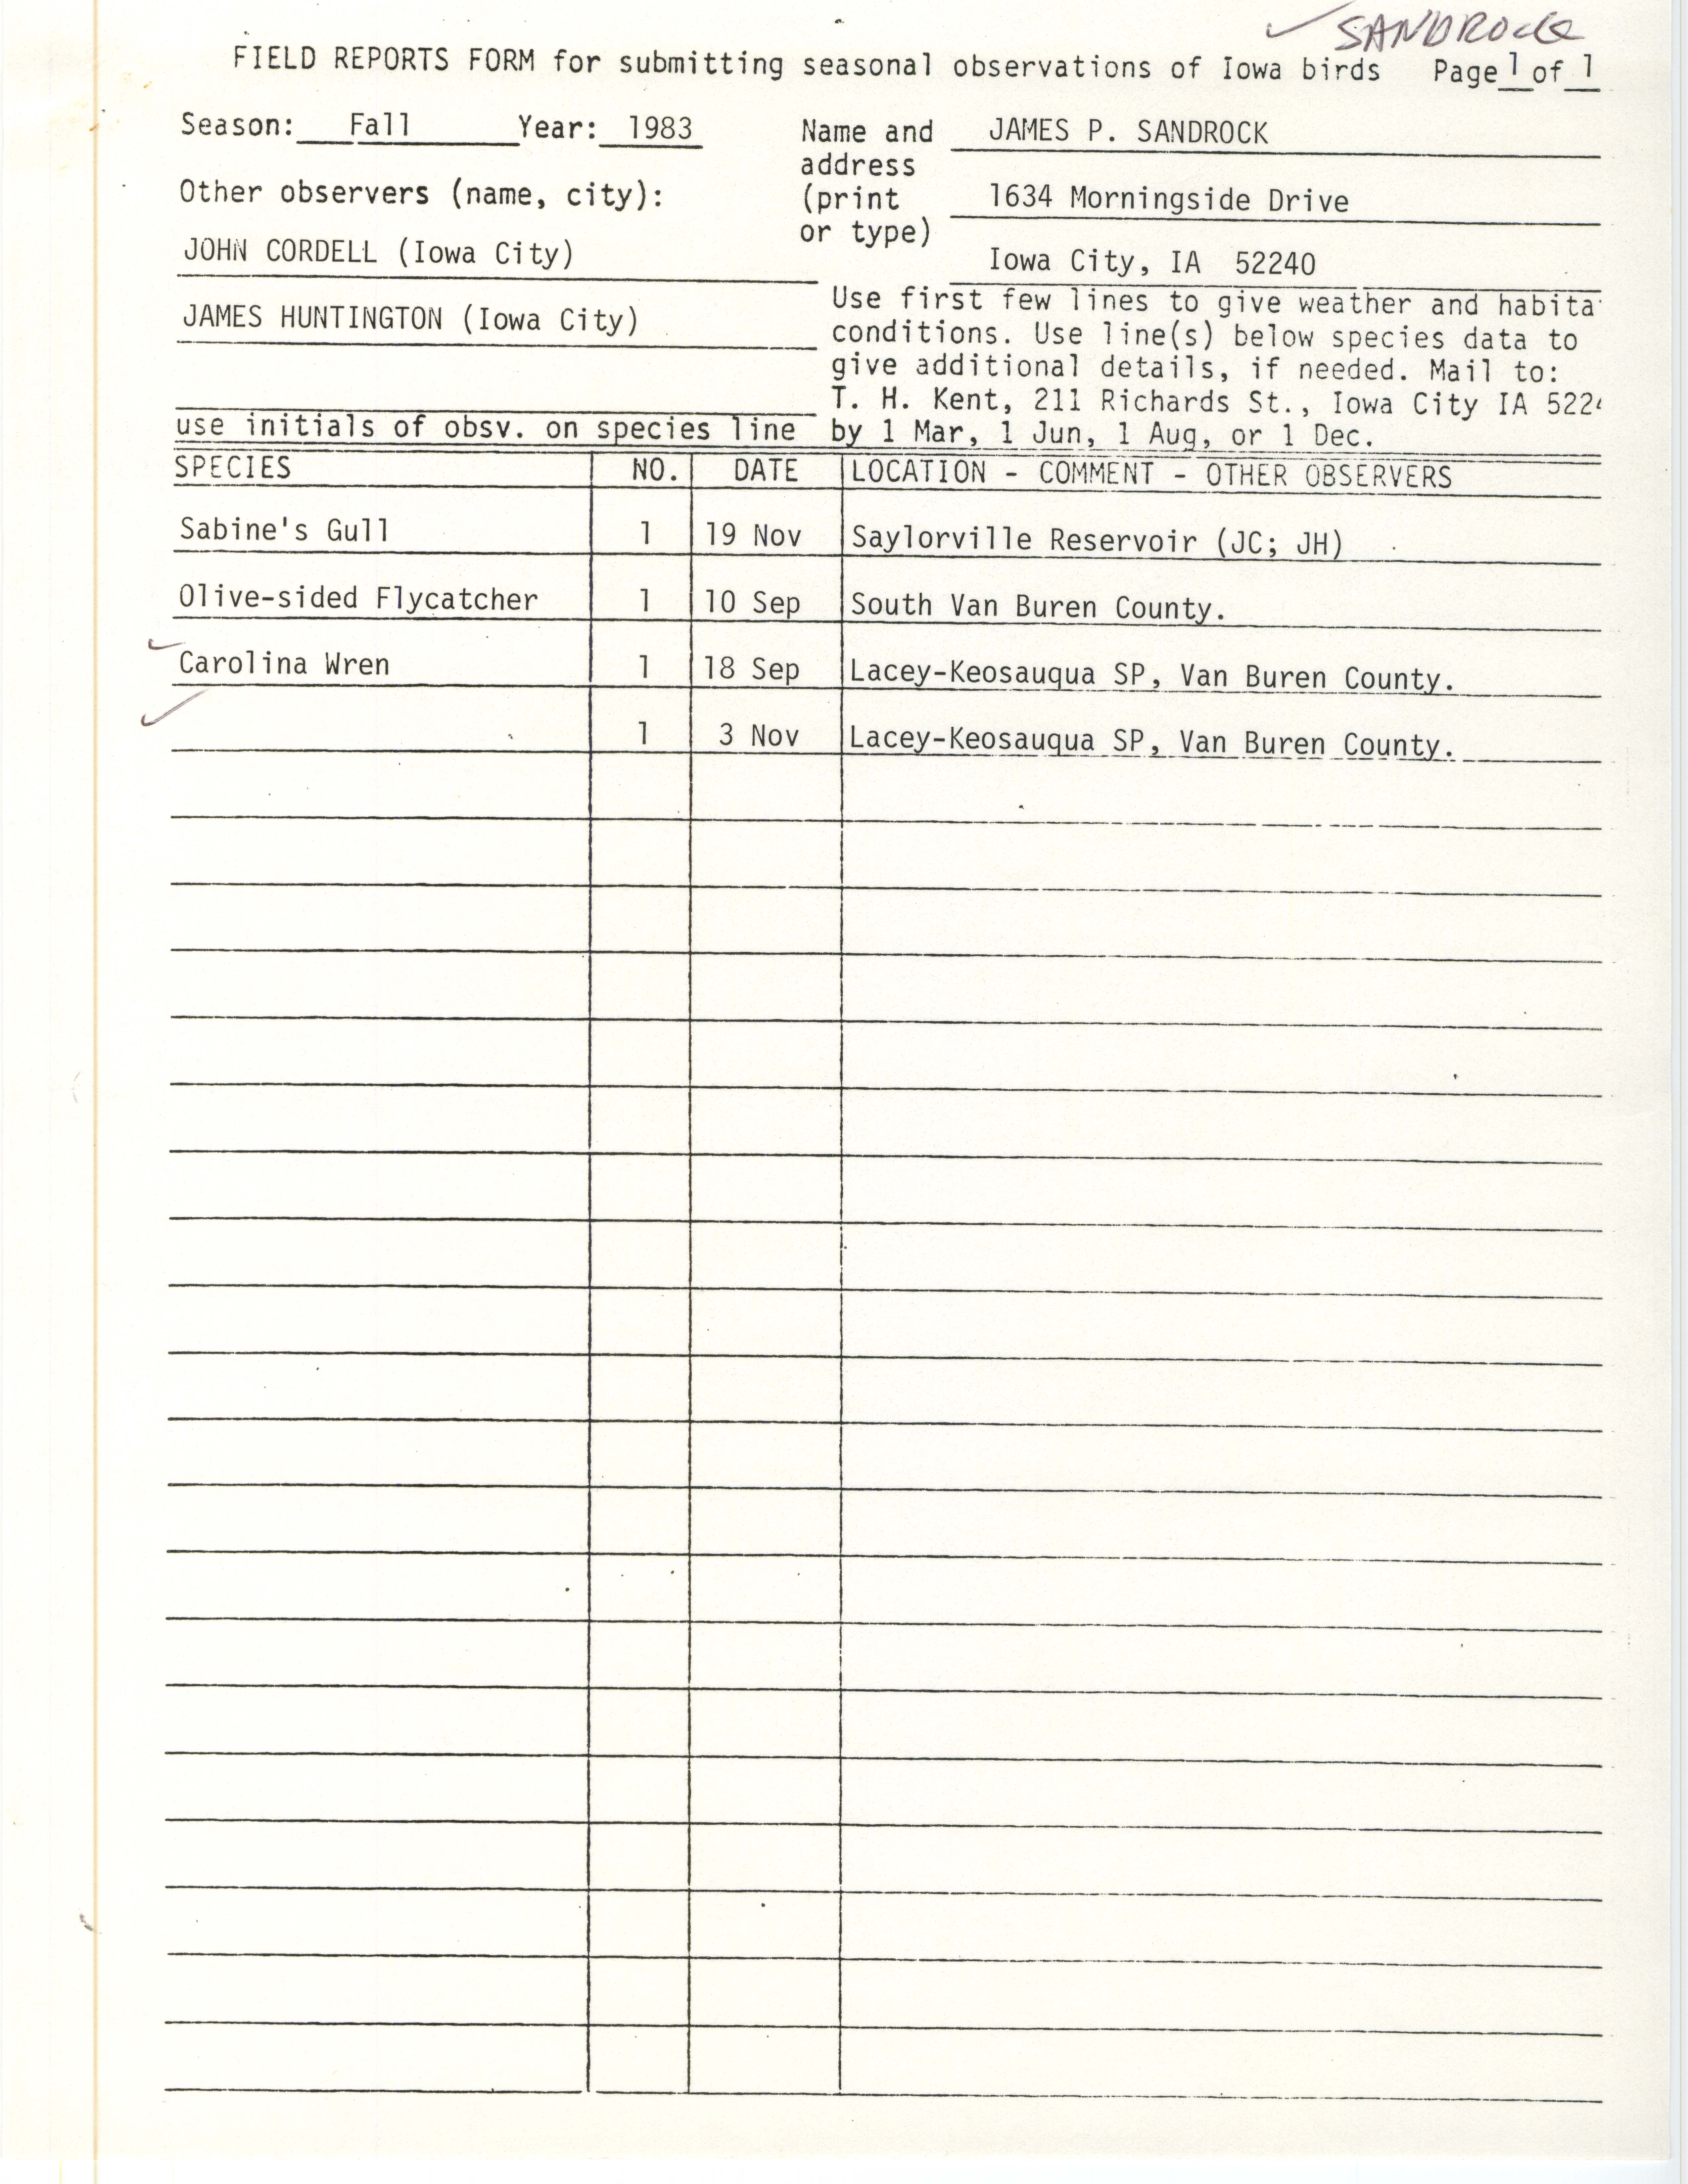 Field reports form for submitting seasonal observations of Iowa birds, James Sandrock, fall 1983